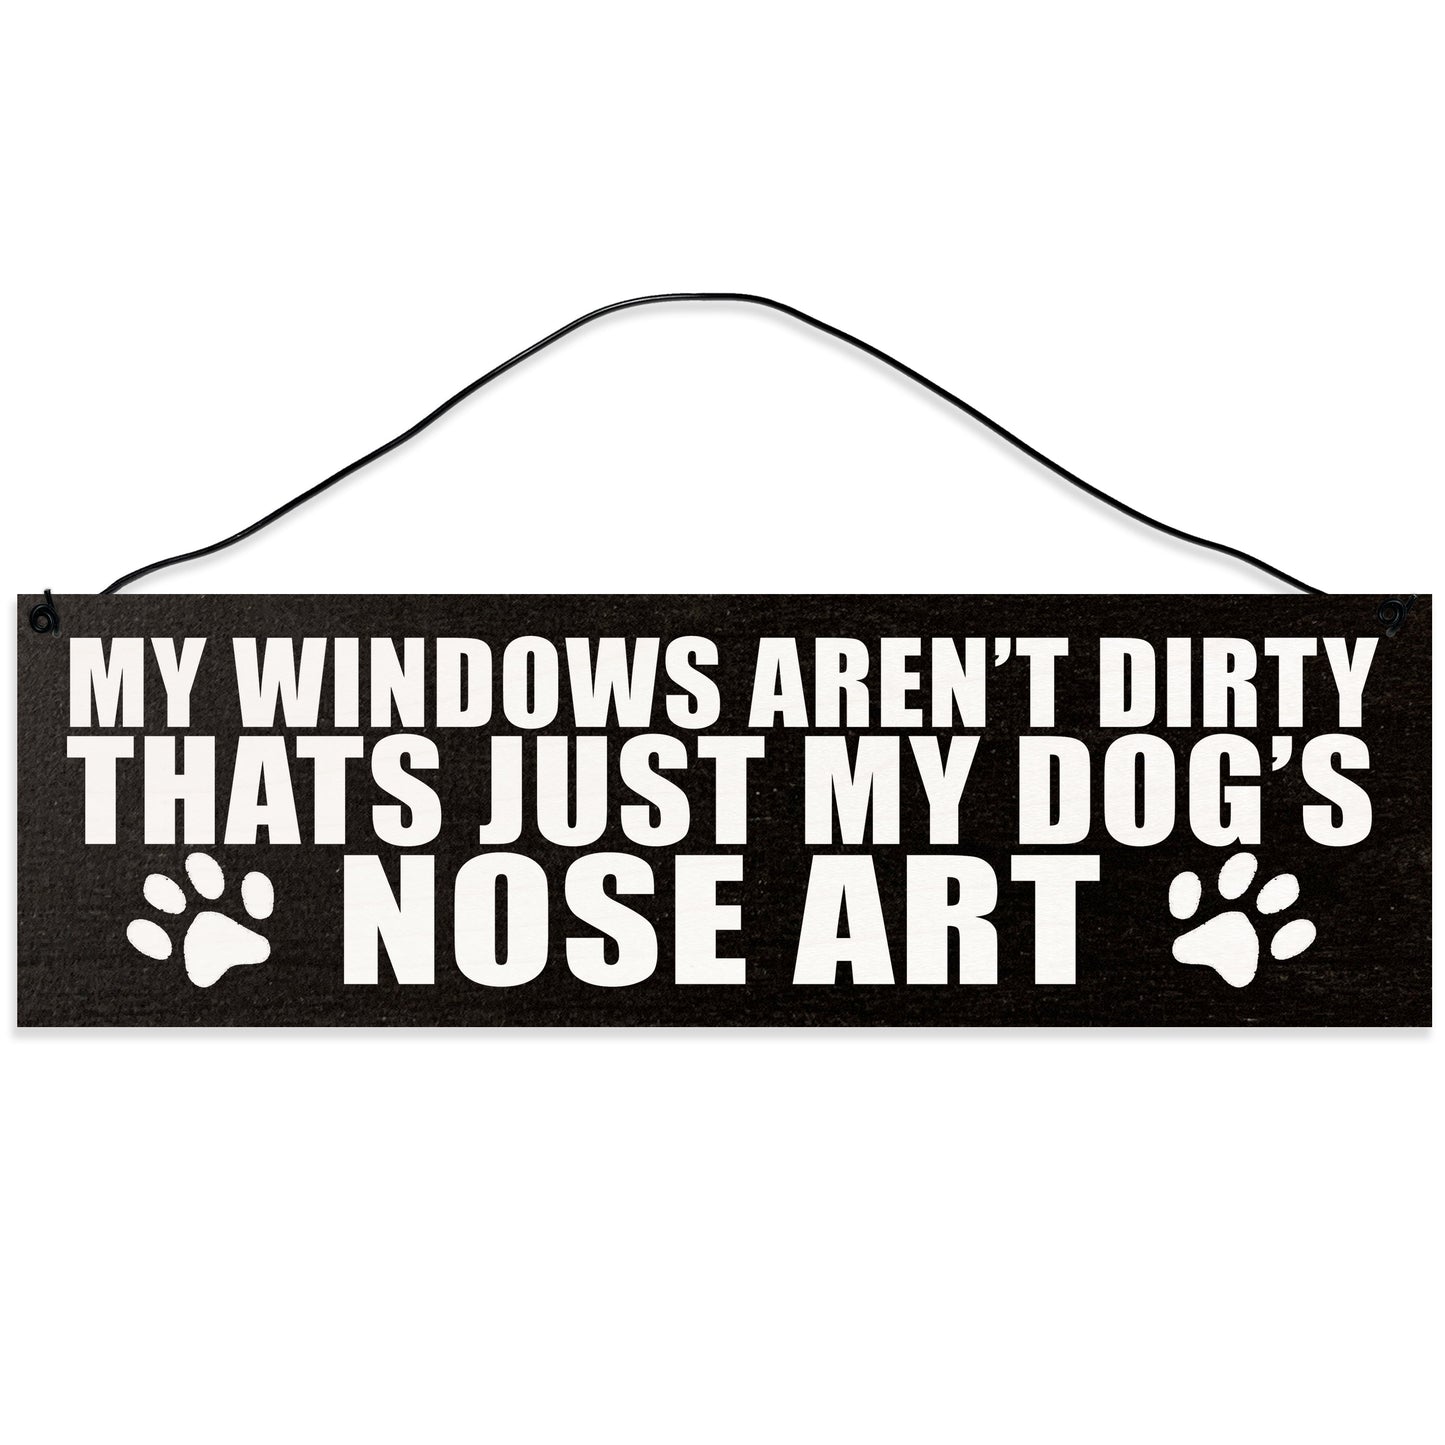 Sawyer's Mill - My Windows aren't Dirty, That's Just My Dog's Nose Art. Wood Sign for Home or Office. Measures 3x10 inches.